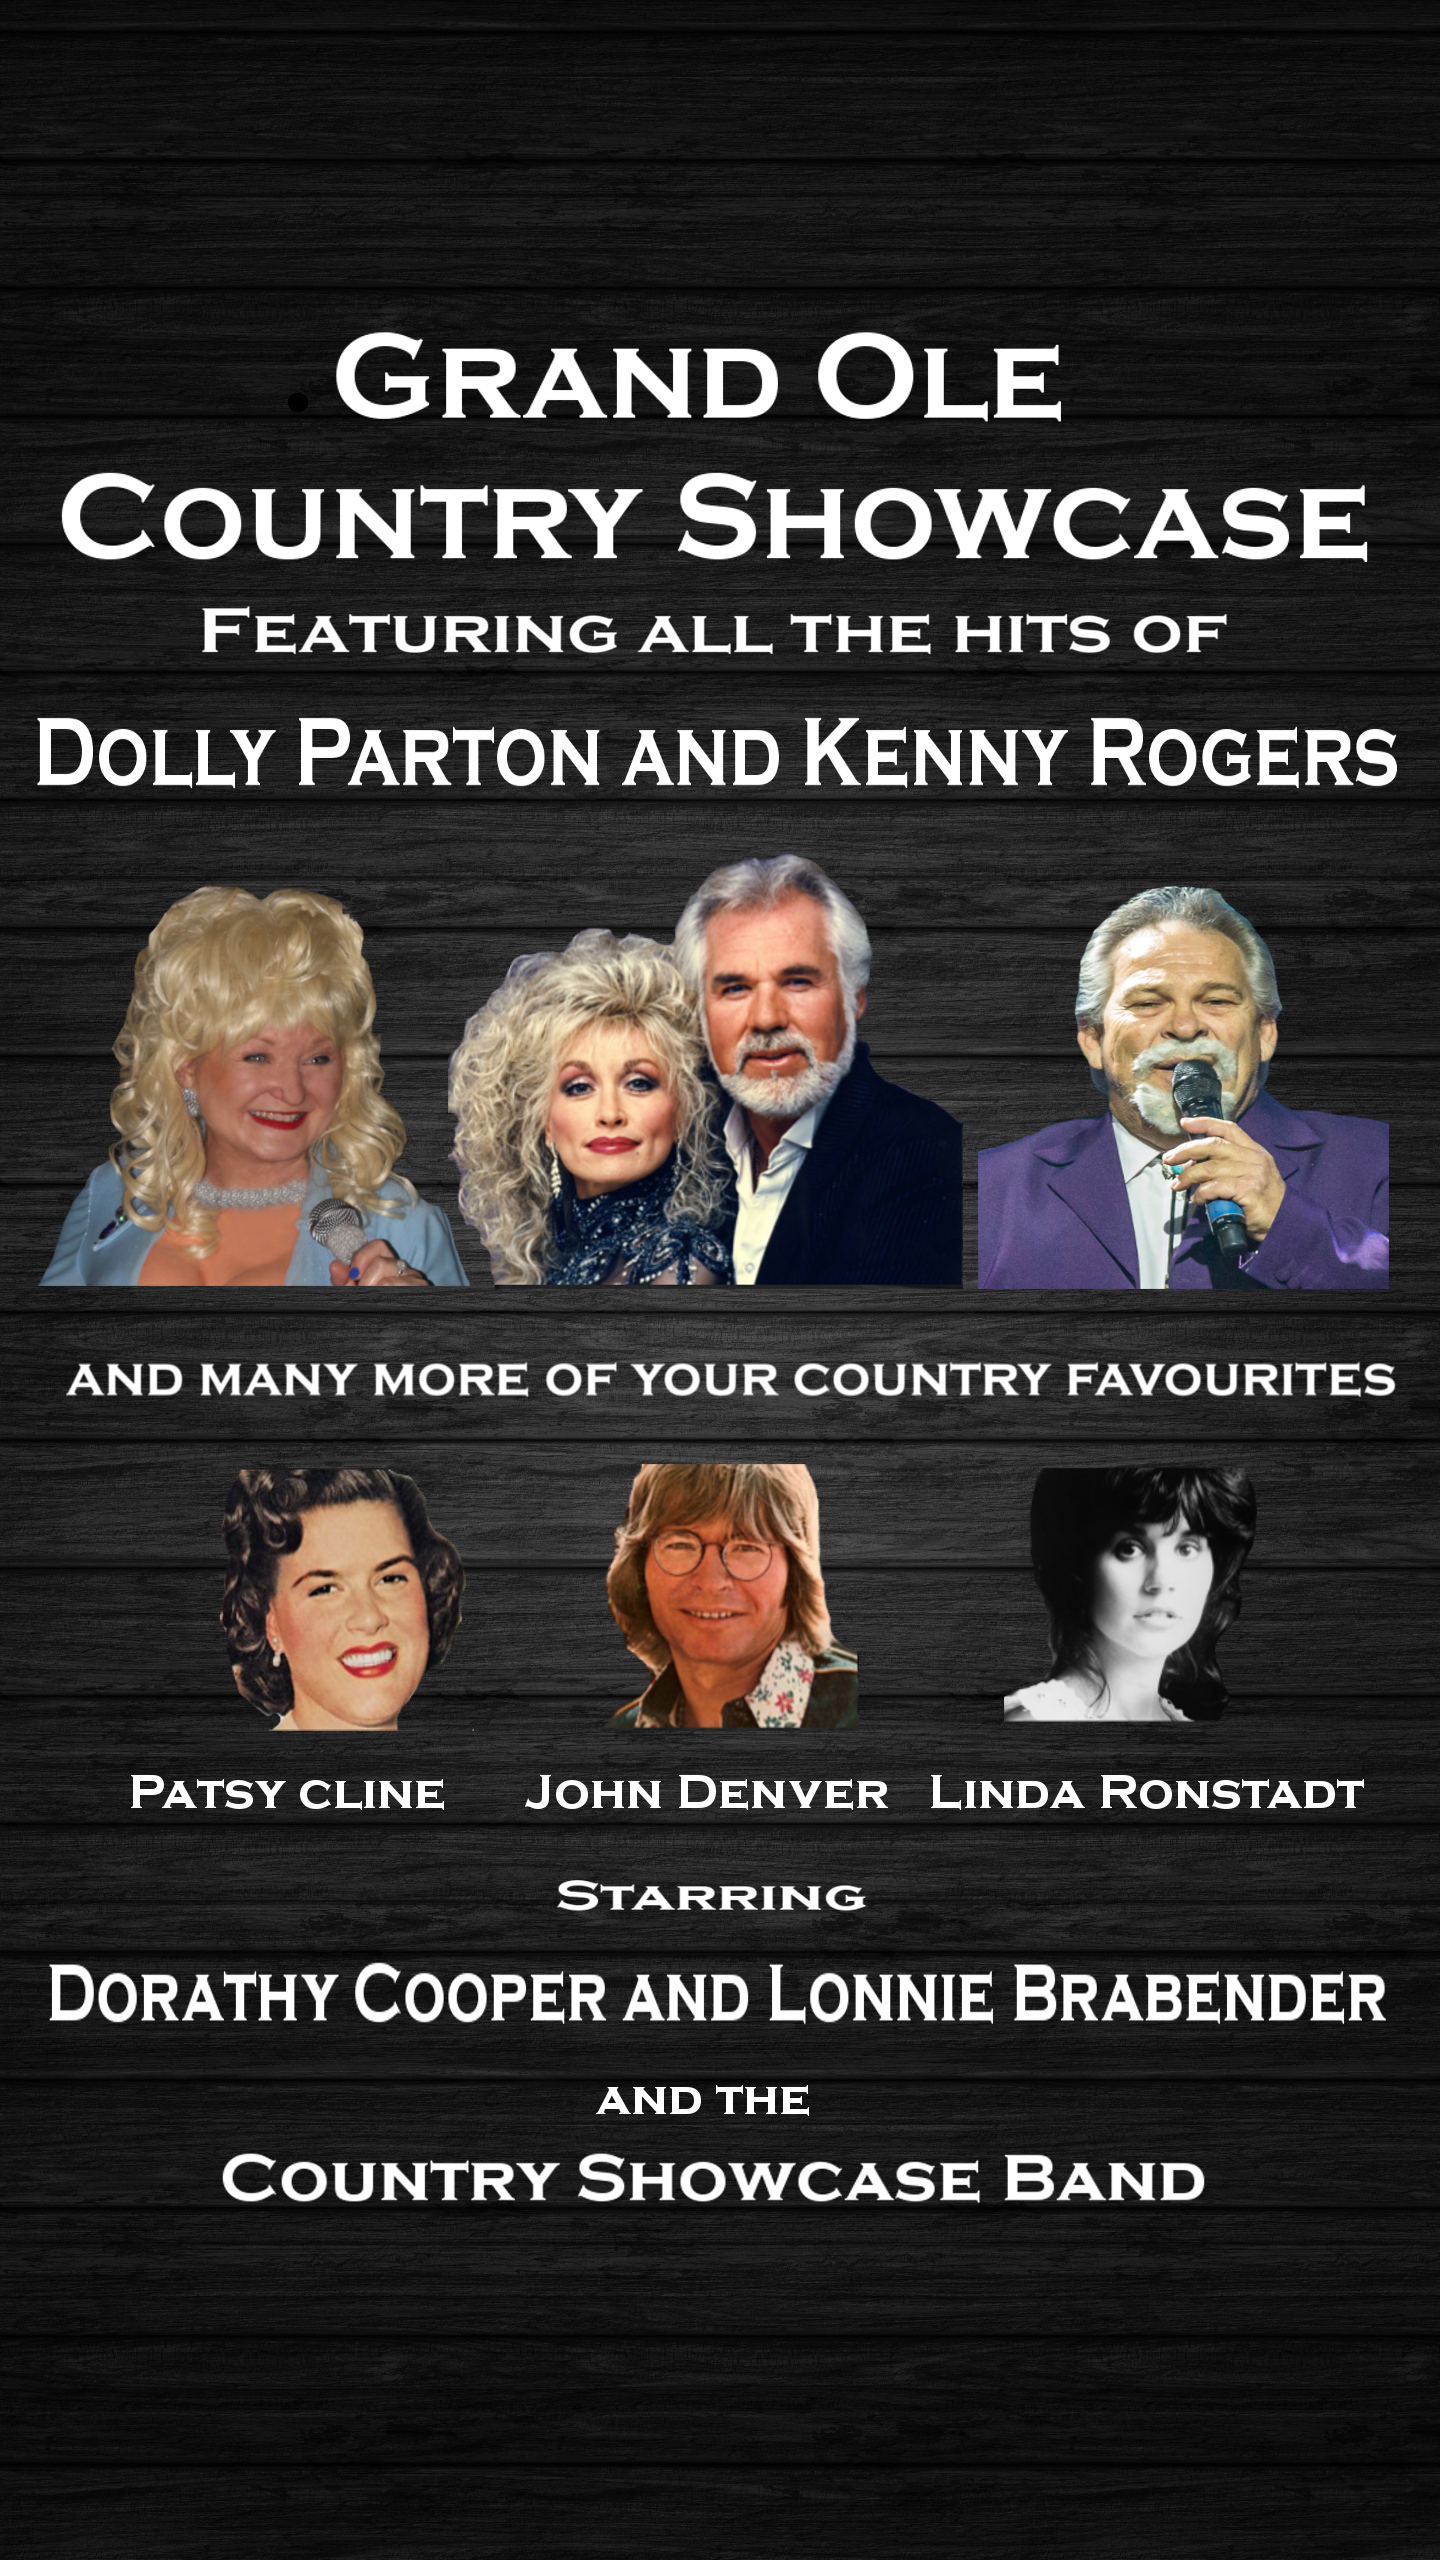 DOLLY PARTON TRIBUTE SHOW KENNY ROGERS